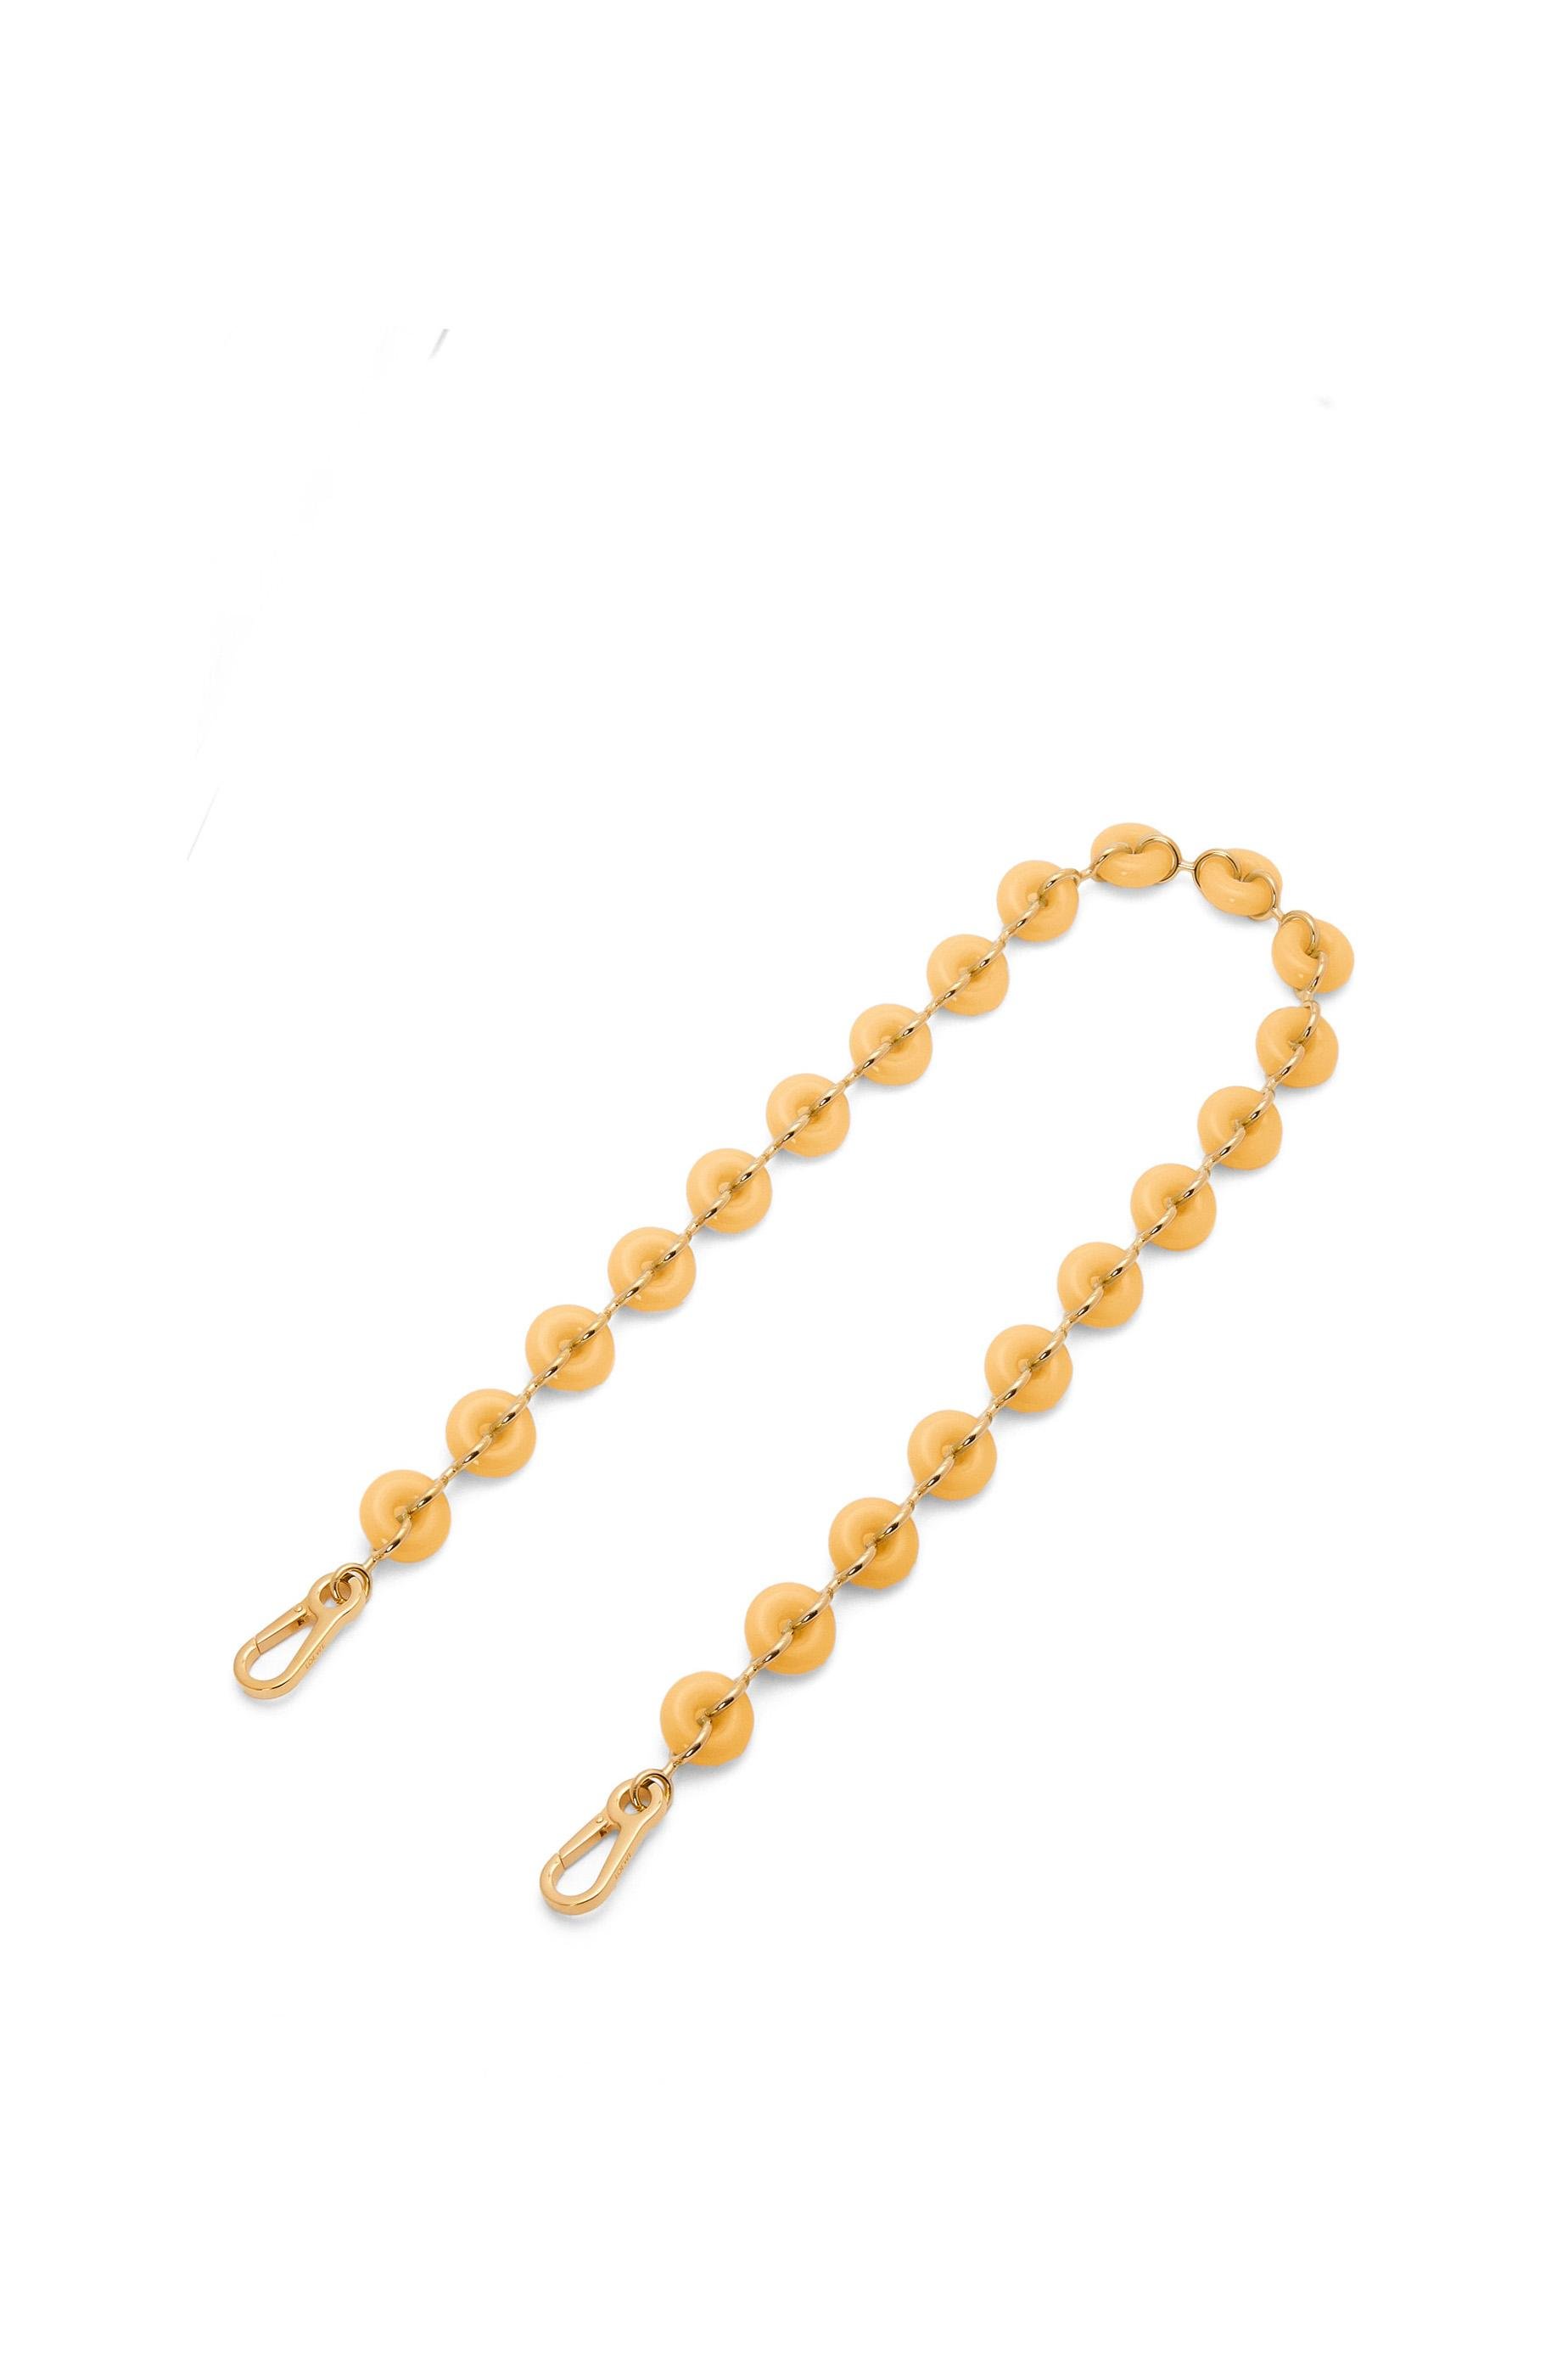 Donut chain strap in acetate by LOEWE